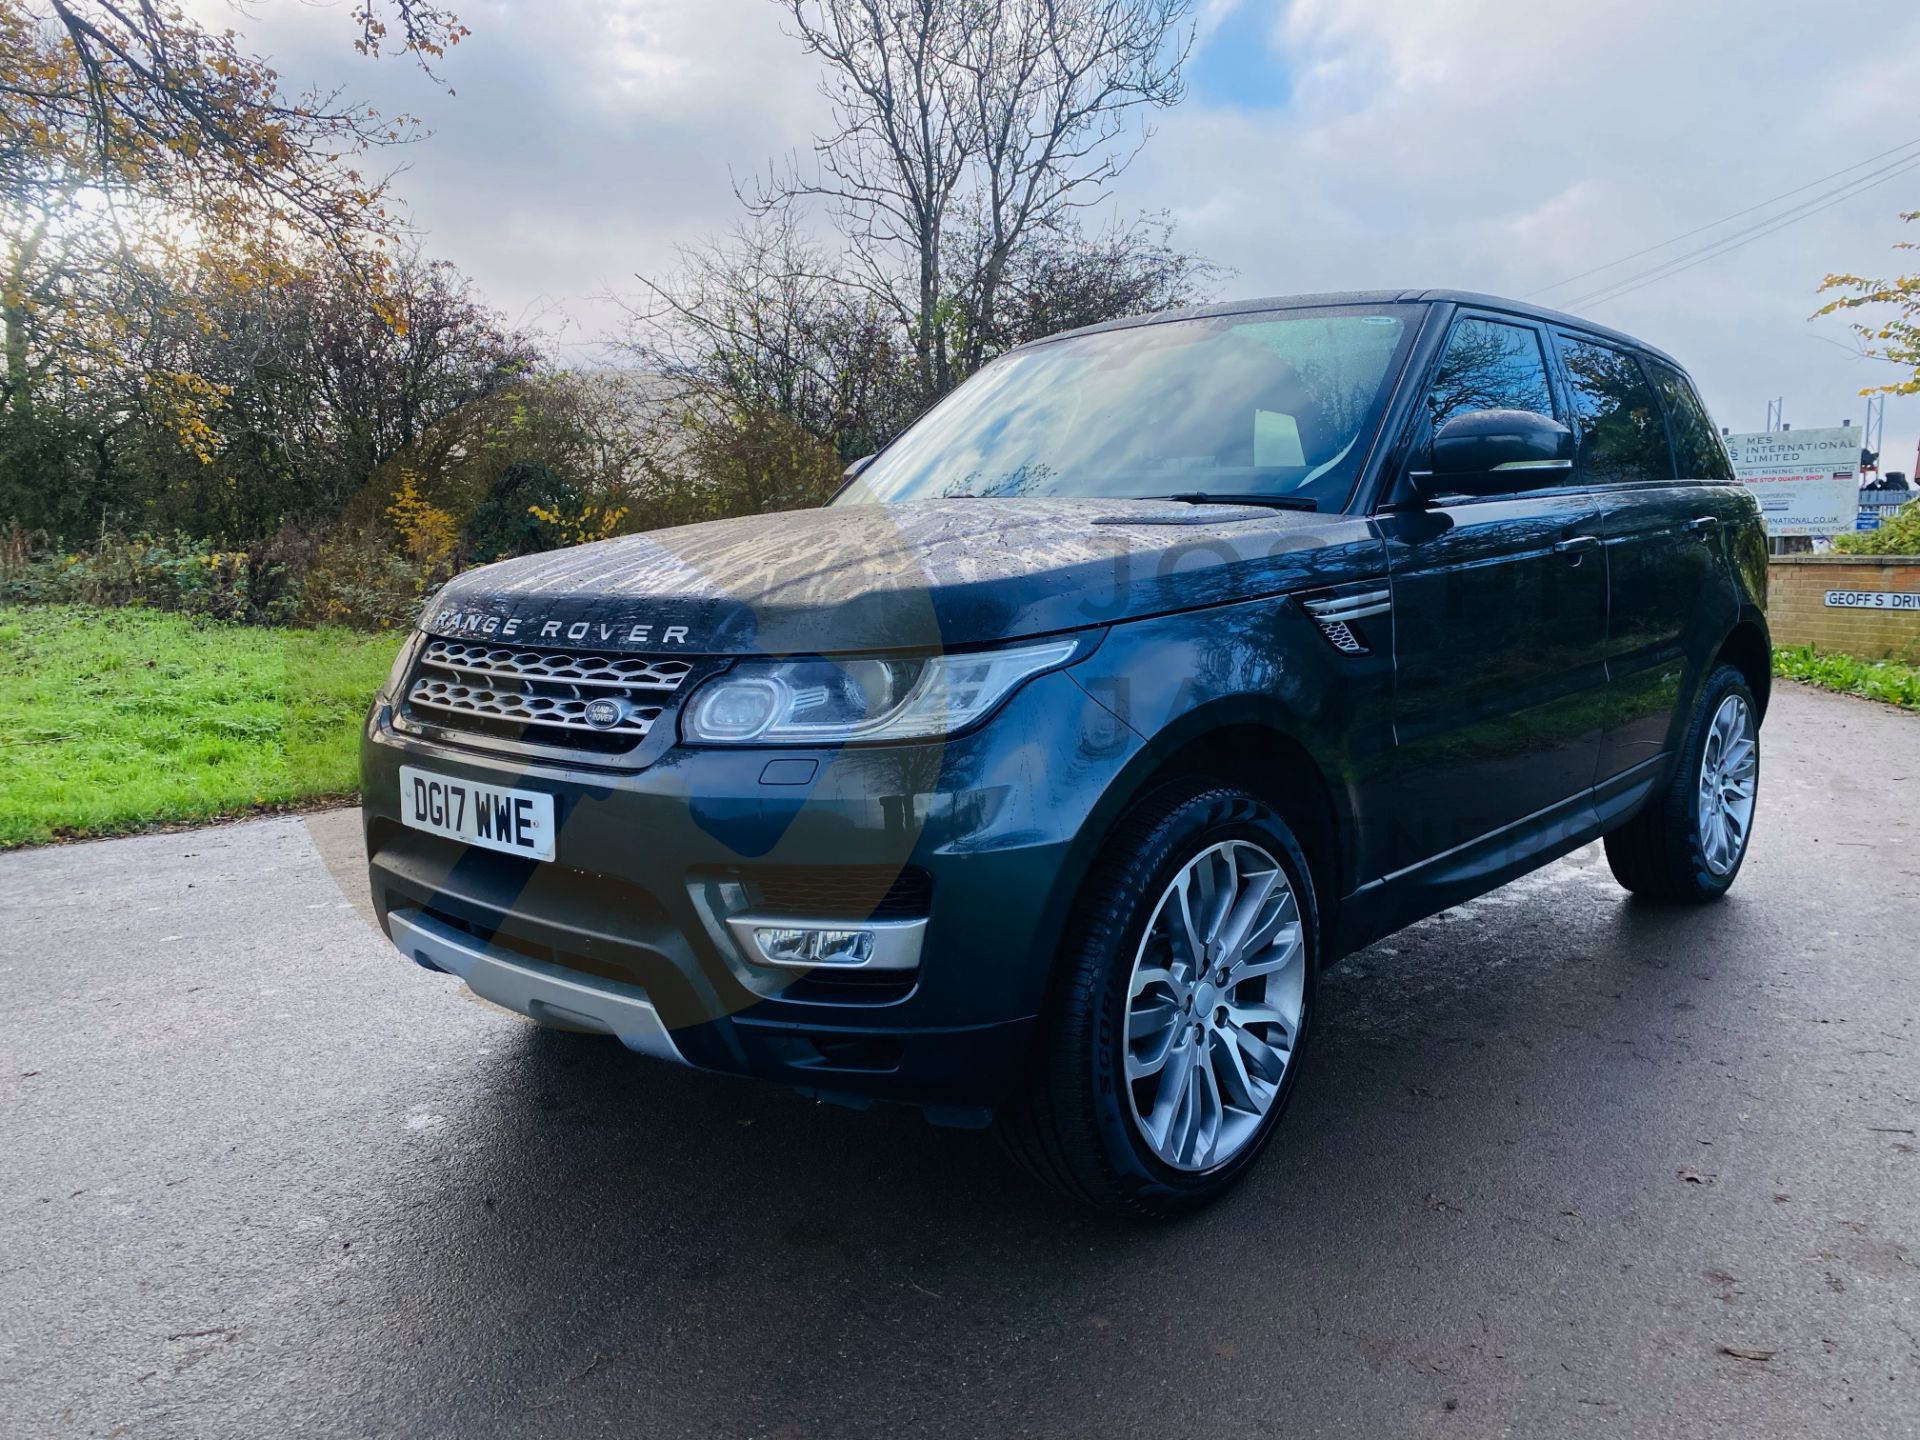 (ON SALE) RANGE ROVER SPORT "HSE" AUTO (NEW SHAPE) 17 REG - LEATHER - PANORAMIC ROOF - SAT NAV - - Image 5 of 47